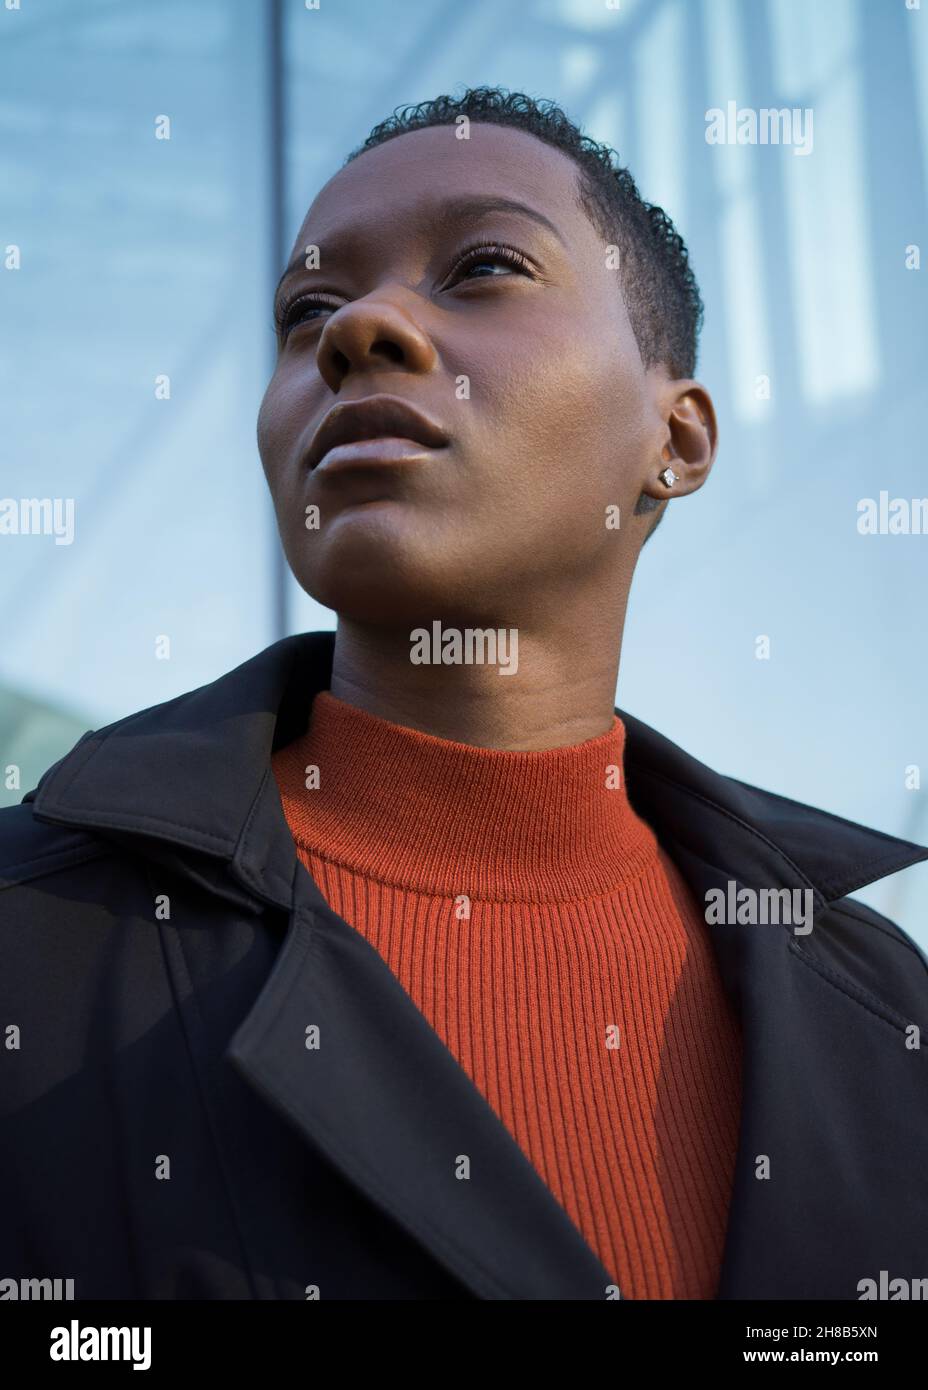 Portrait of a young woman in black coat and orange mock turtleneck shirt Stock Photo